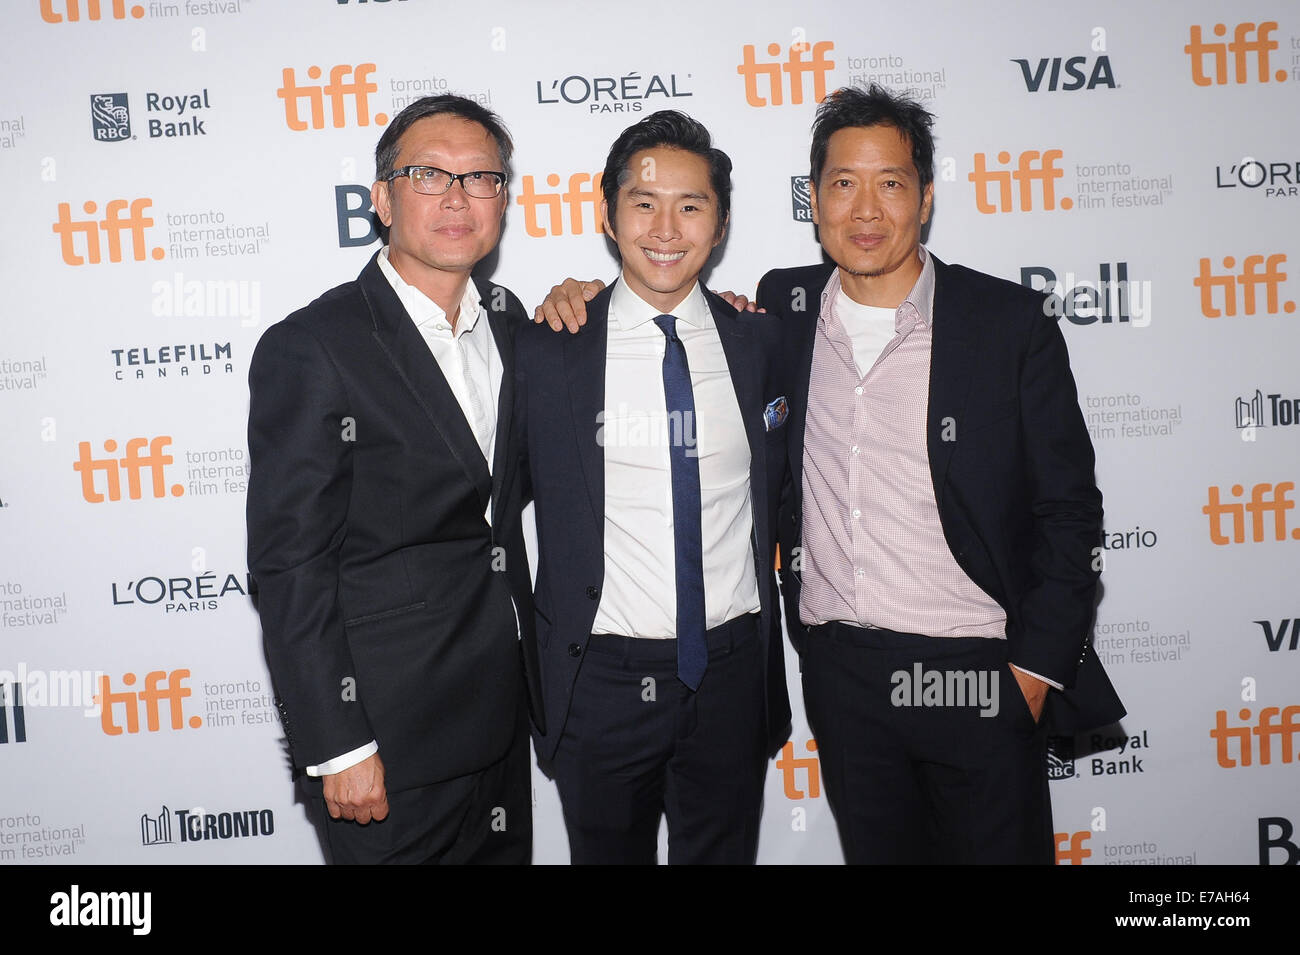 Toronto, Canada. 10th September, 2014. Director Andrew Lau, actor Justin Chon  and director Andrew Loo  attend the 'Revenge Of The Green Dragons' premiere during the 2014 Toronto International Film Festival at Ryerson Theatre on September 10, 2014 in Toronto, Canada. Credit:  Igor Vidyashev/ZUMA Wire/Alamy Live News Stock Photo